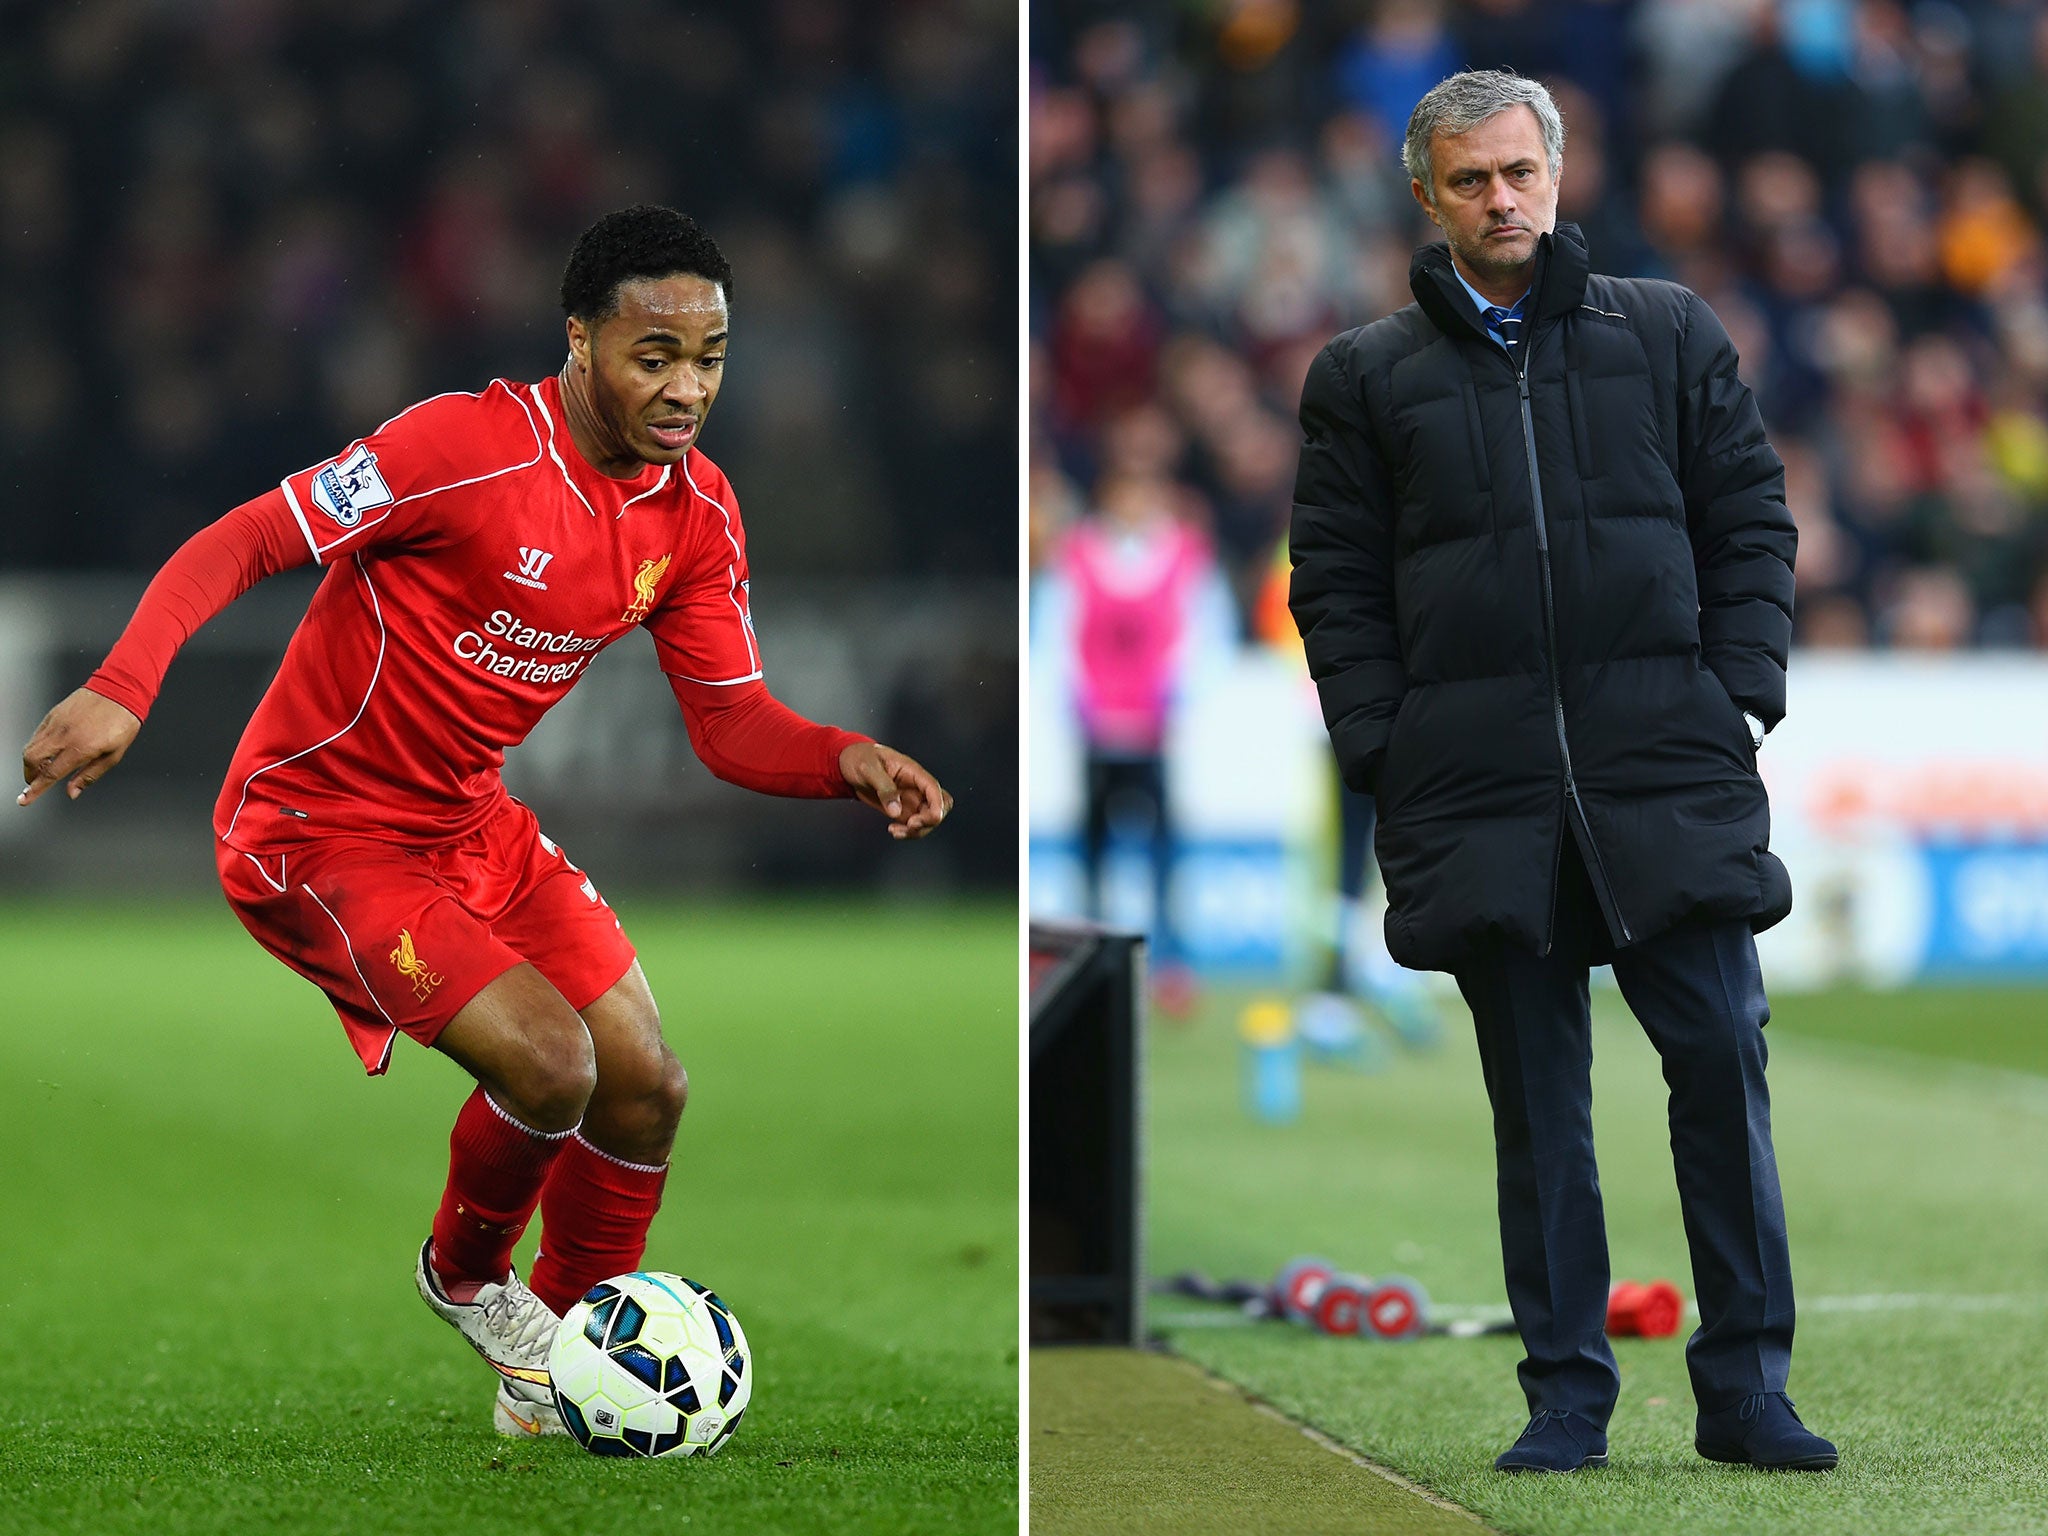 Jose Mourinho believes every player has his price after being asked about Raheem Sterling's future